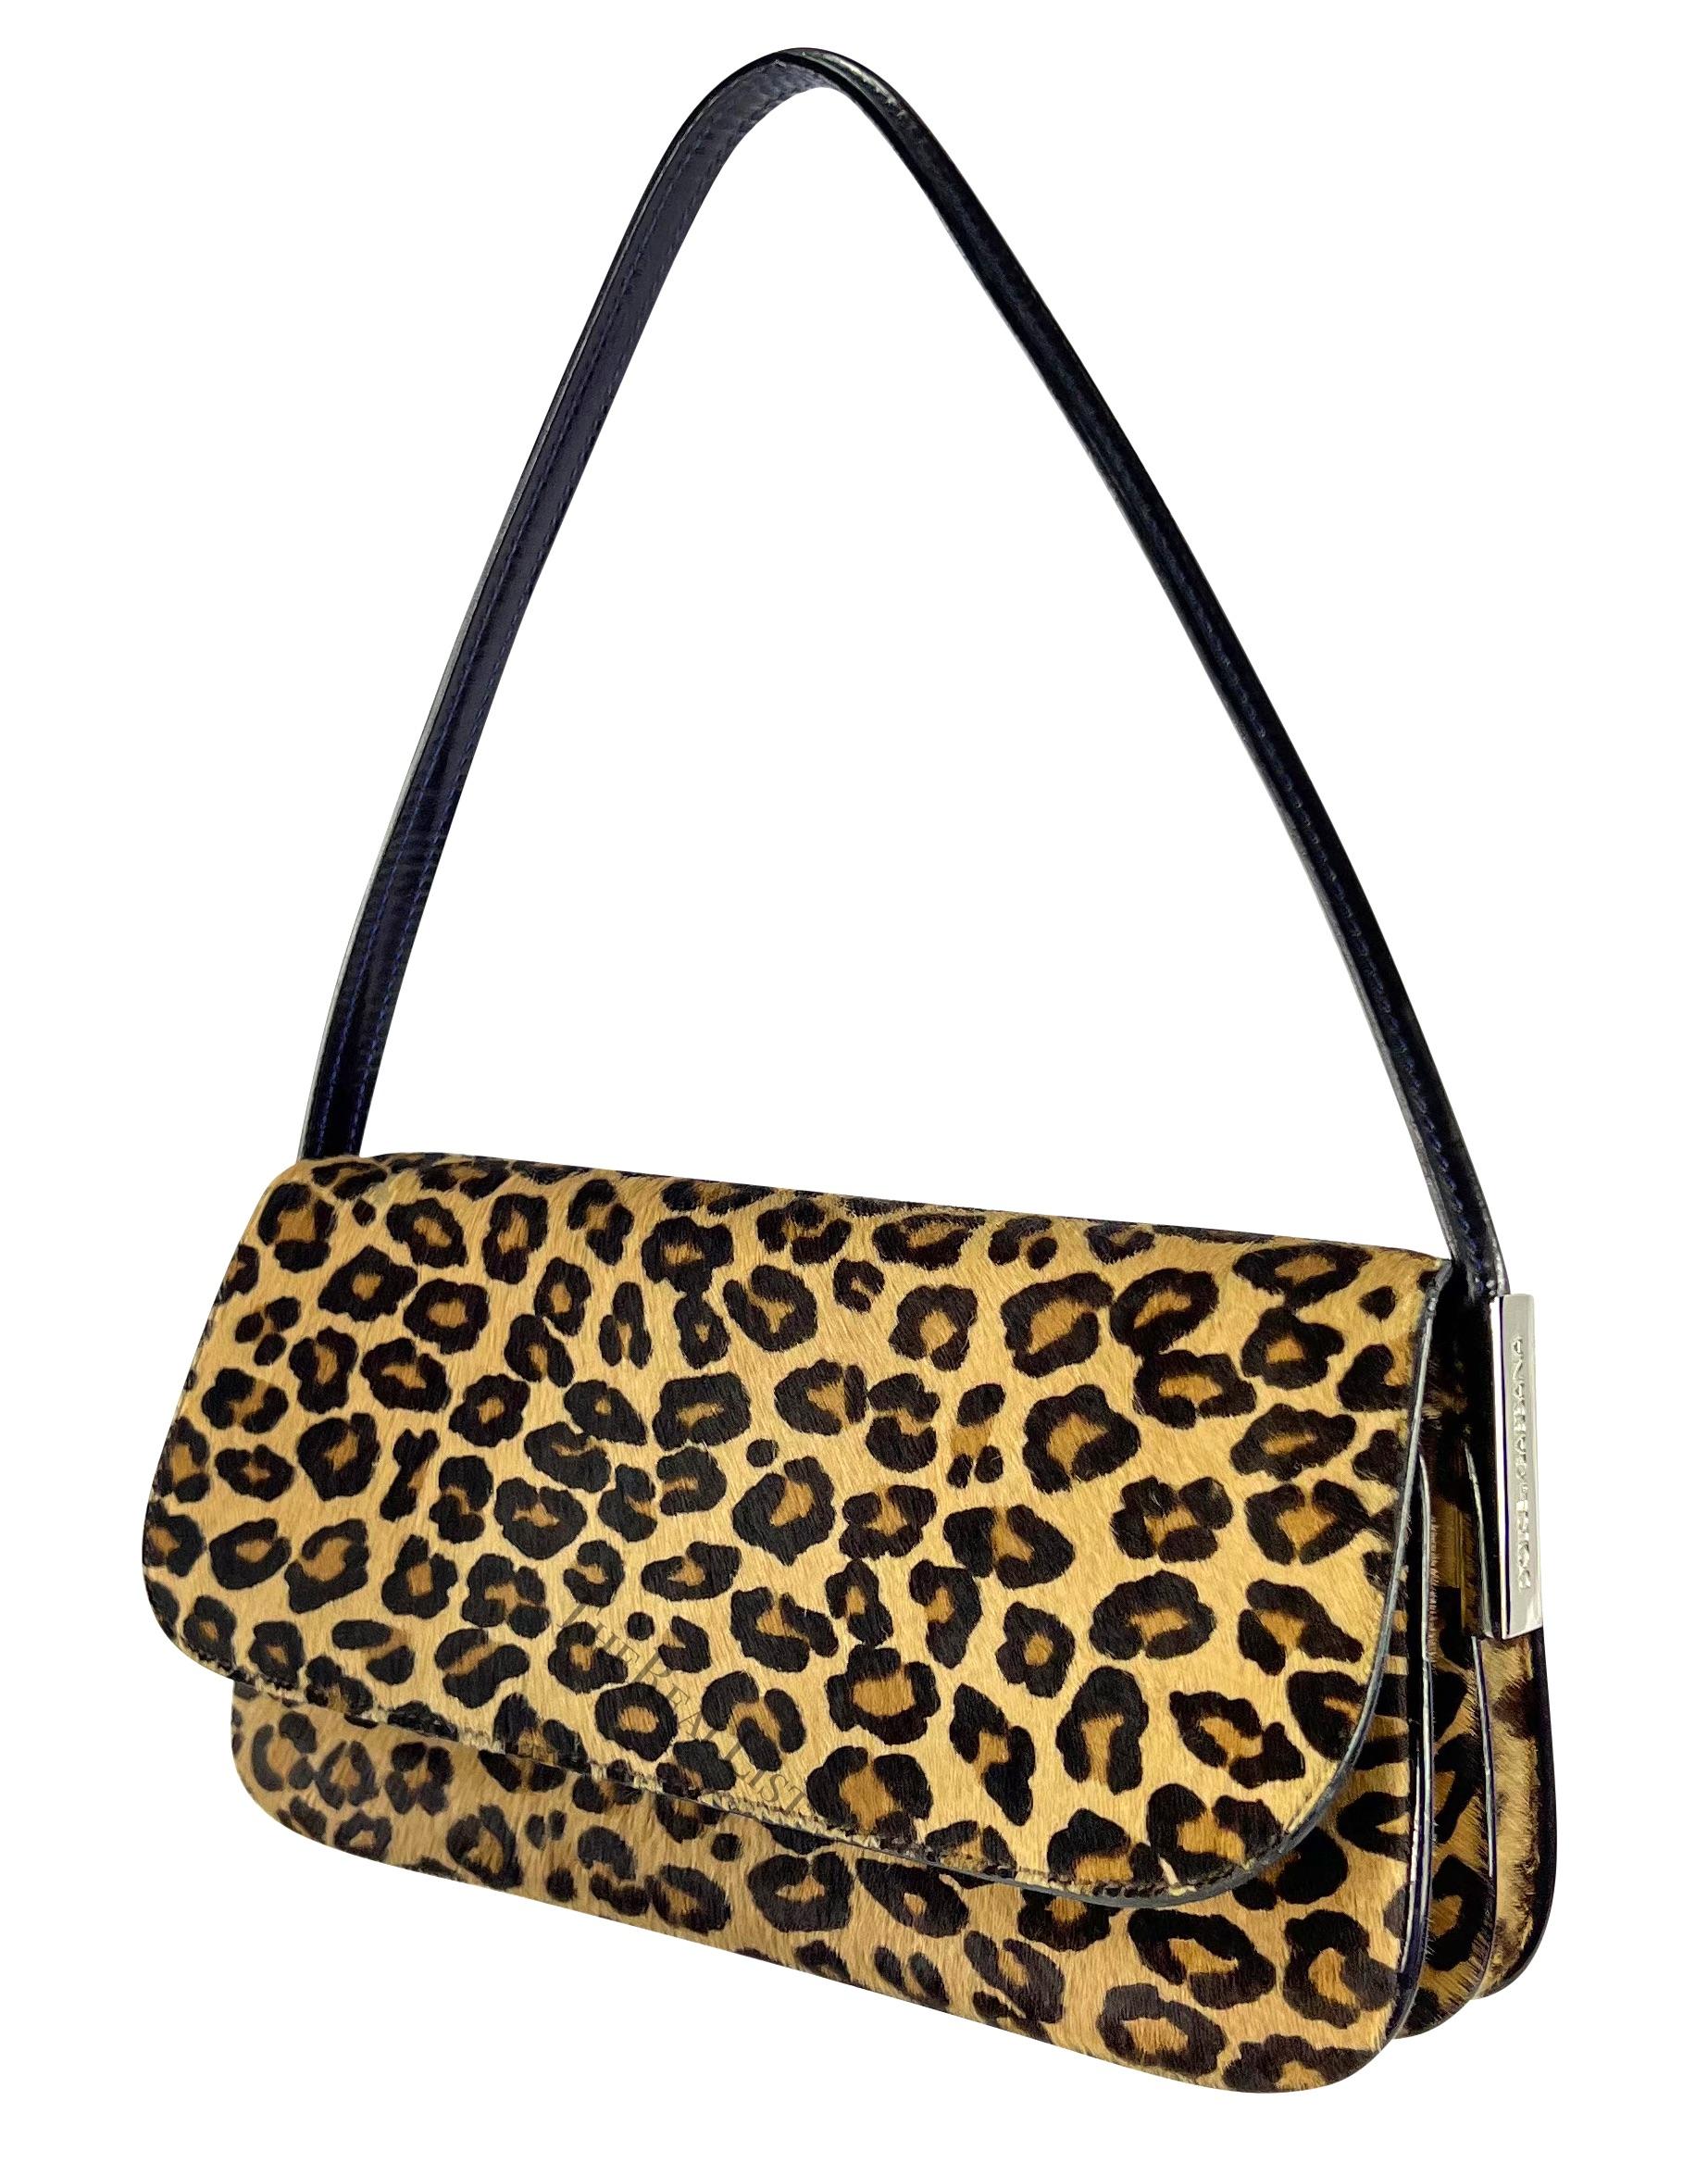 Presenting a fabulous cheetah print Dolce & Gabbana pony hair shoulder bag. Elevate your style with this exquisite cheetah print Dolce & Gabbana pony hair shoulder bag, a fashion-forward piece from the Fall/Winter 2000 collection. Its simplicity and